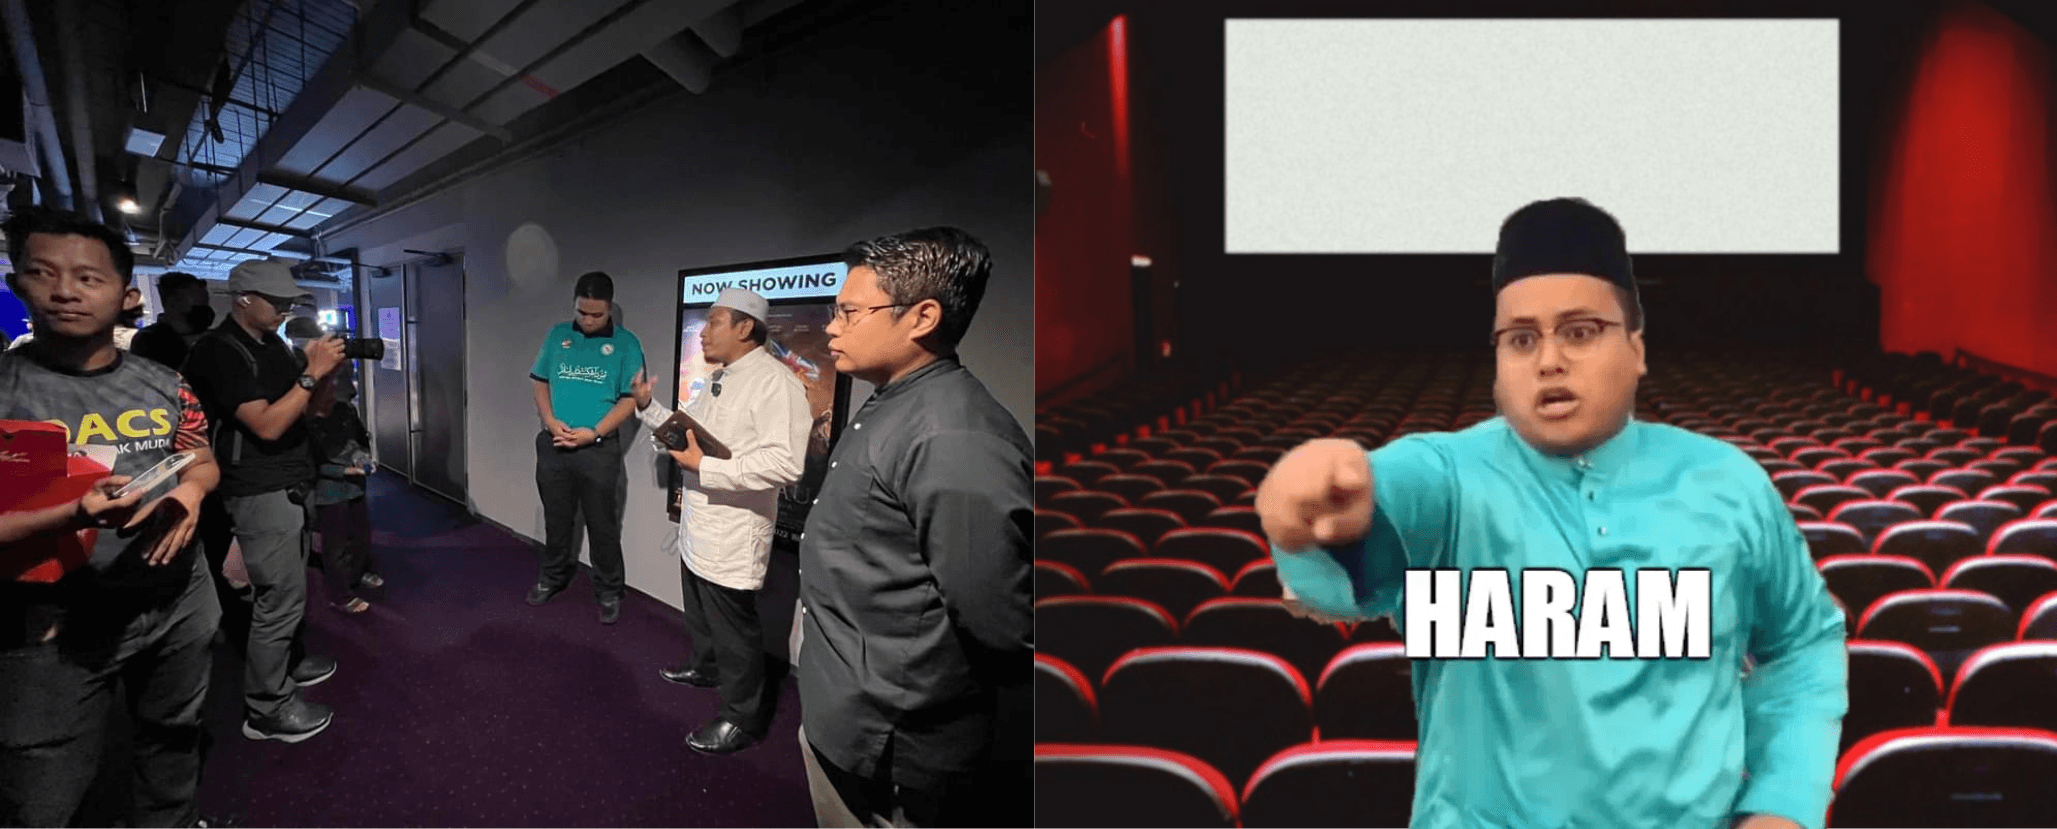 PAS Youth Chief Slammed For Double Standards After Visiting Cinema To Watch “Mat Kilau”